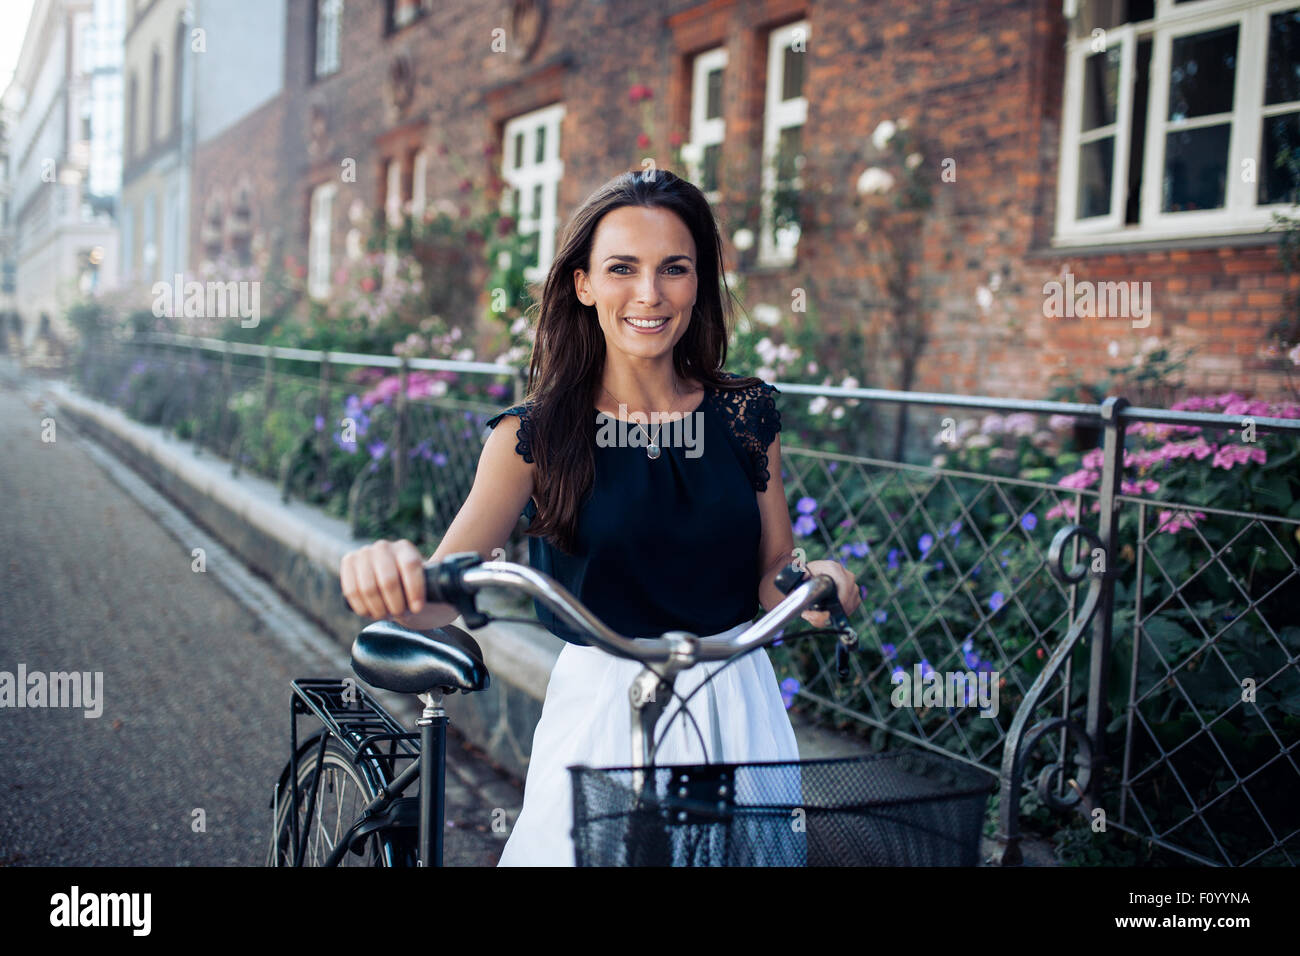 Beautiful woman with a cycle walking down the city road. Caucasian female smiling and looking at camera. Stock Photo